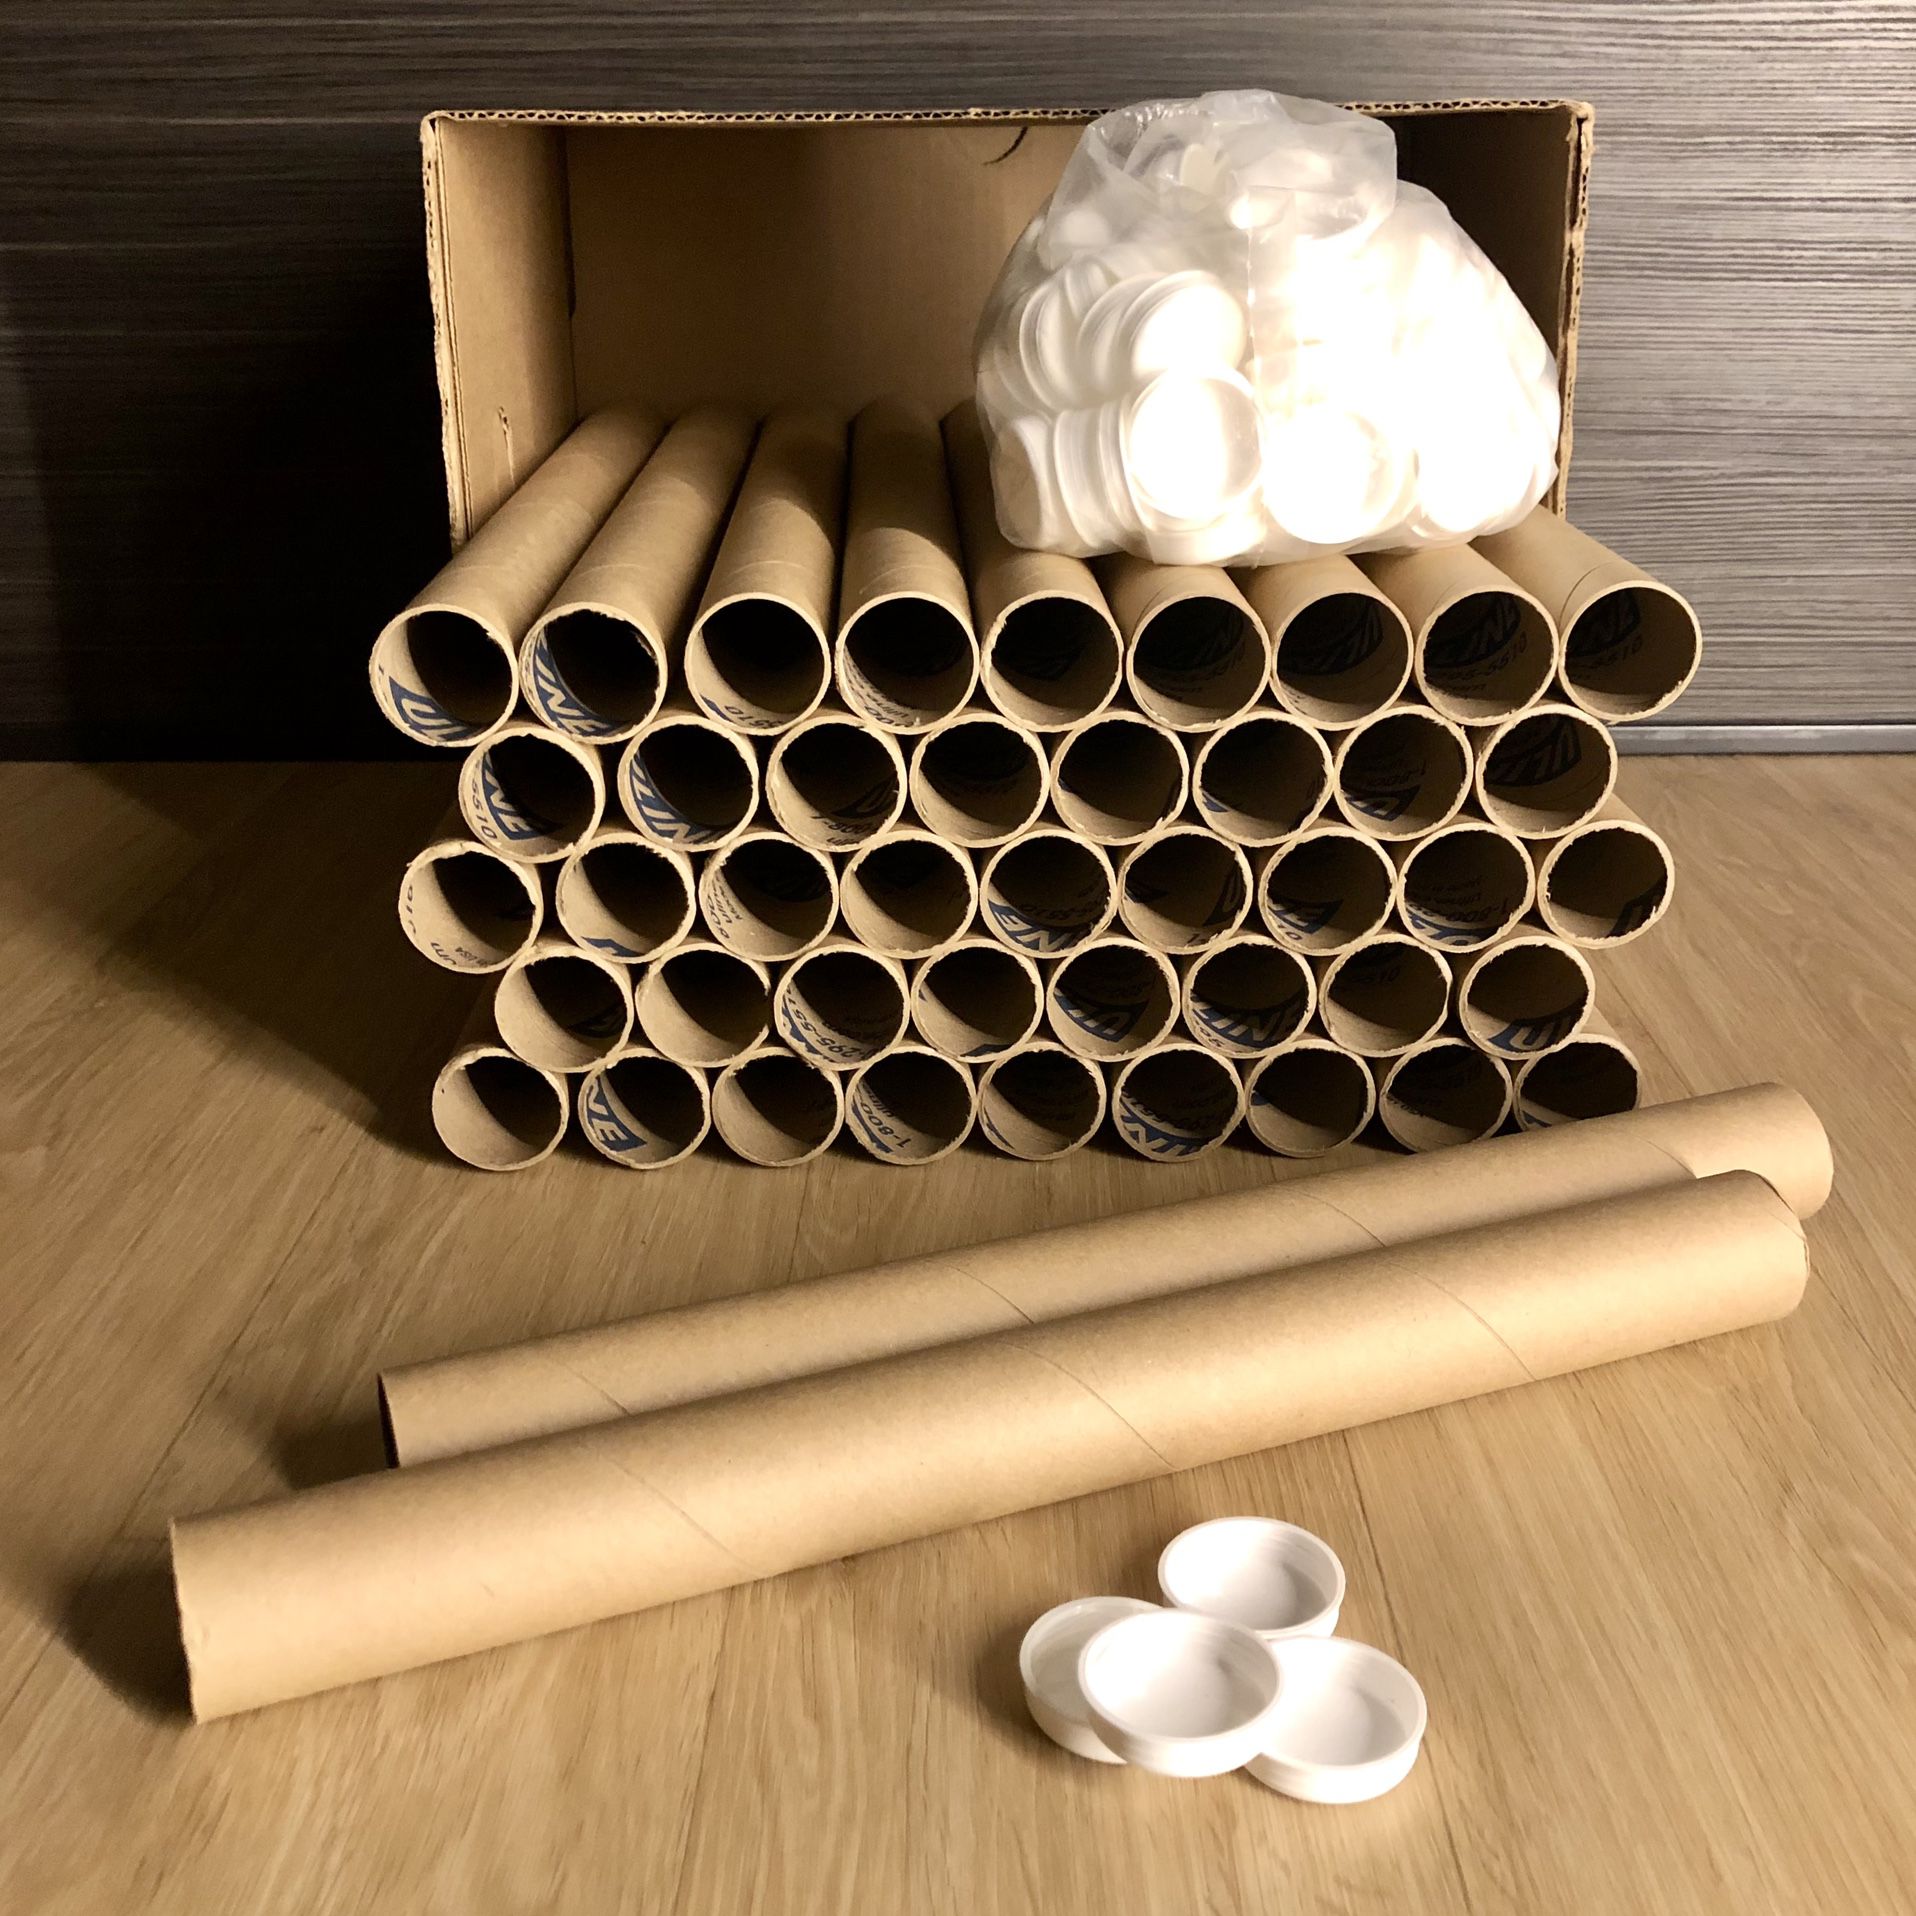 45 NEW Shipping Tubes with Caps, ULINE